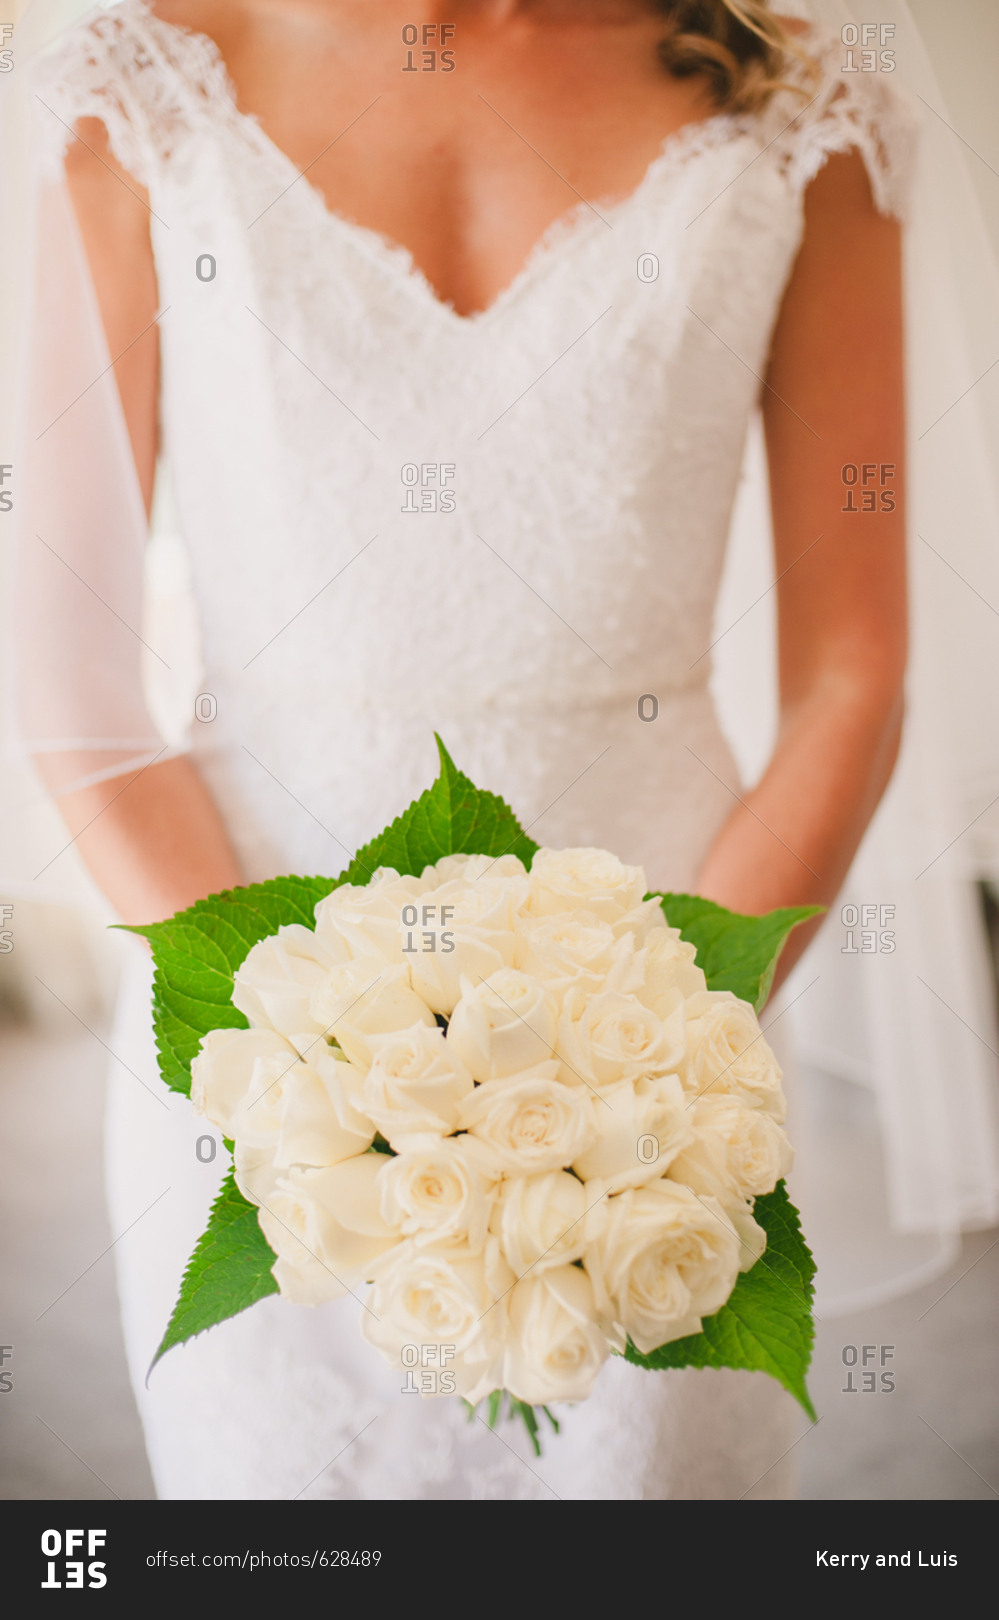 Bride holding bouquet of white roses